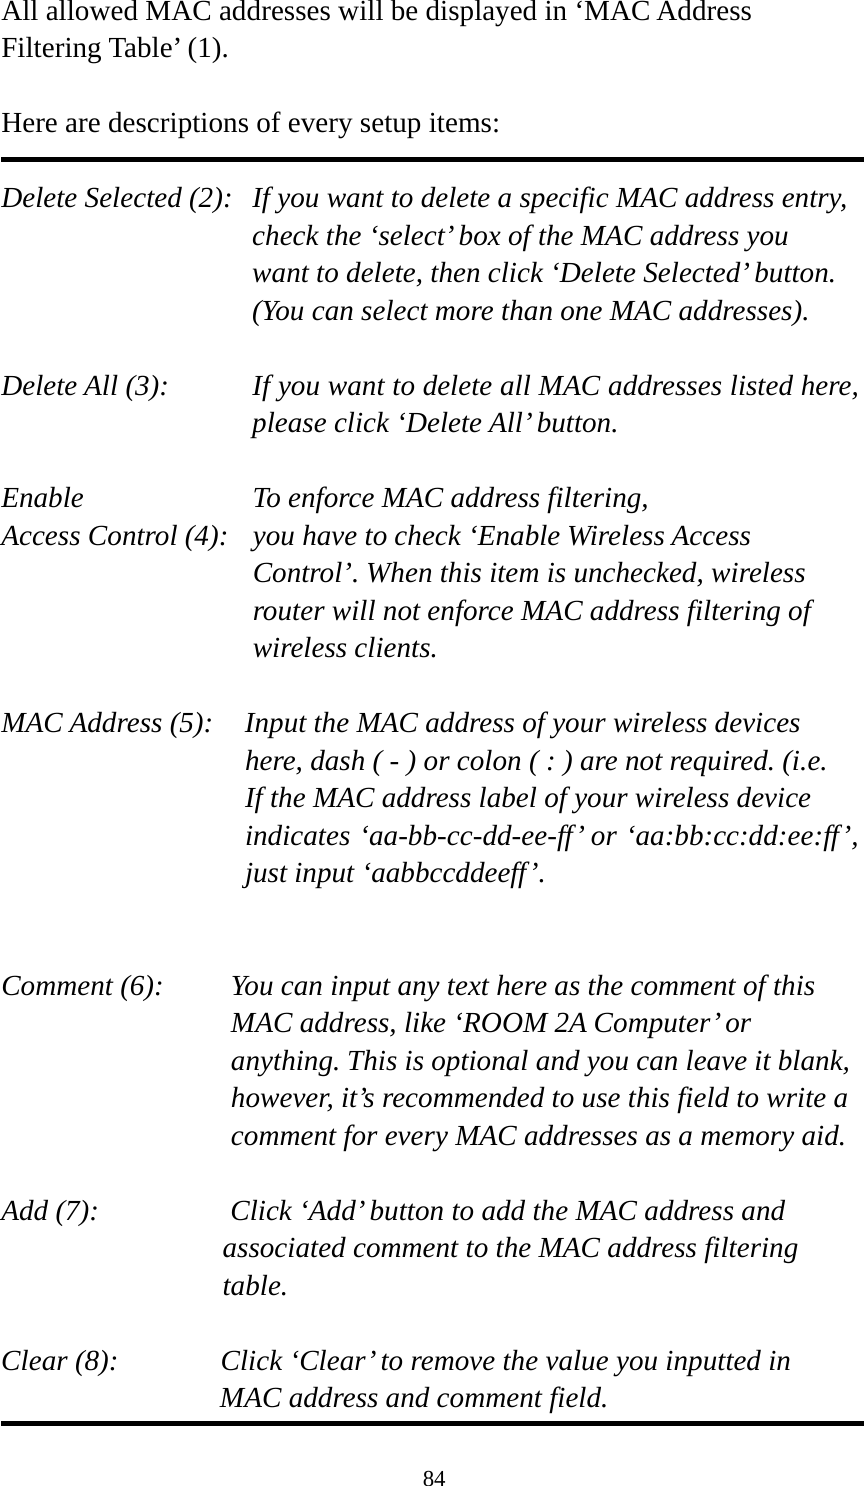 84 All allowed MAC addresses will be displayed in ‘MAC Address Filtering Table’ (1).    Here are descriptions of every setup items:  Delete Selected (2):   If you want to delete a specific MAC address entry, check the ‘select’ box of the MAC address you want to delete, then click ‘Delete Selected’ button. (You can select more than one MAC addresses).  Delete All (3):    If you want to delete all MAC addresses listed here, please click ‘Delete All’ button.  Enable      To enforce MAC address filtering, Access Control (4):   you have to check ‘Enable Wireless Access Control’. When this item is unchecked, wireless router will not enforce MAC address filtering of wireless clients.  MAC Address (5):    Input the MAC address of your wireless devices here, dash ( - ) or colon ( : ) are not required. (i.e. If the MAC address label of your wireless device indicates ‘aa-bb-cc-dd-ee-ff’ or ‘aa:bb:cc:dd:ee:ff’, just input ‘aabbccddeeff’.   Comment (6):    You can input any text here as the comment of this MAC address, like ‘ROOM 2A Computer’ or anything. This is optional and you can leave it blank, however, it’s recommended to use this field to write a comment for every MAC addresses as a memory aid.  Add (7):         Click ‘Add’ button to add the MAC address and   associated comment to the MAC address filtering   table.  Clear (8):       Click ‘Clear’ to remove the value you inputted in   MAC address and comment field. 